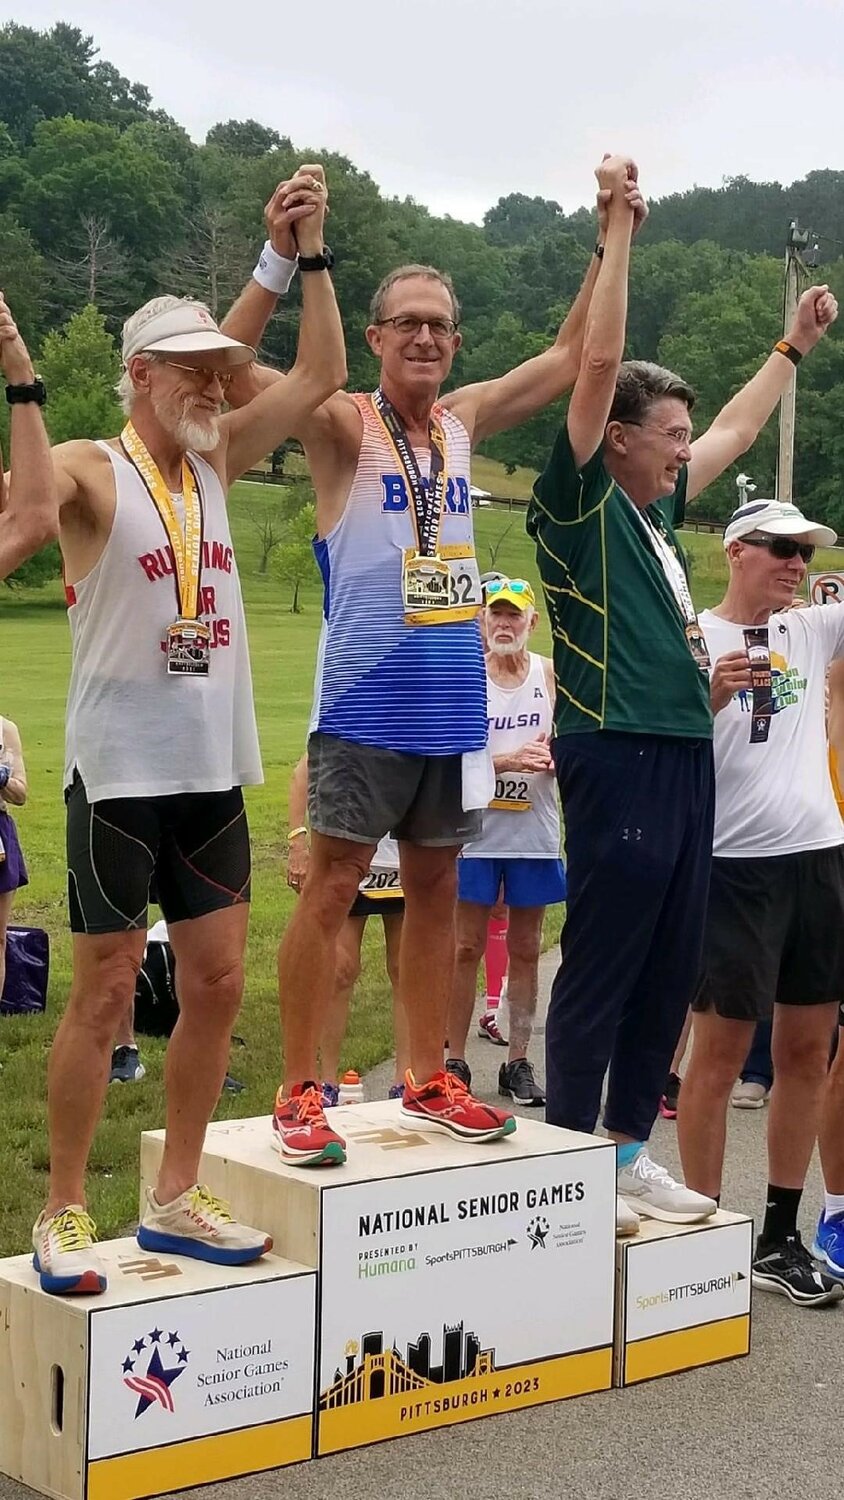 Yardley’s Rick Mingione won age-group titles in both the 5,000- and 10,000-meter events at this week’s National Senior Games in Pittsburgh.